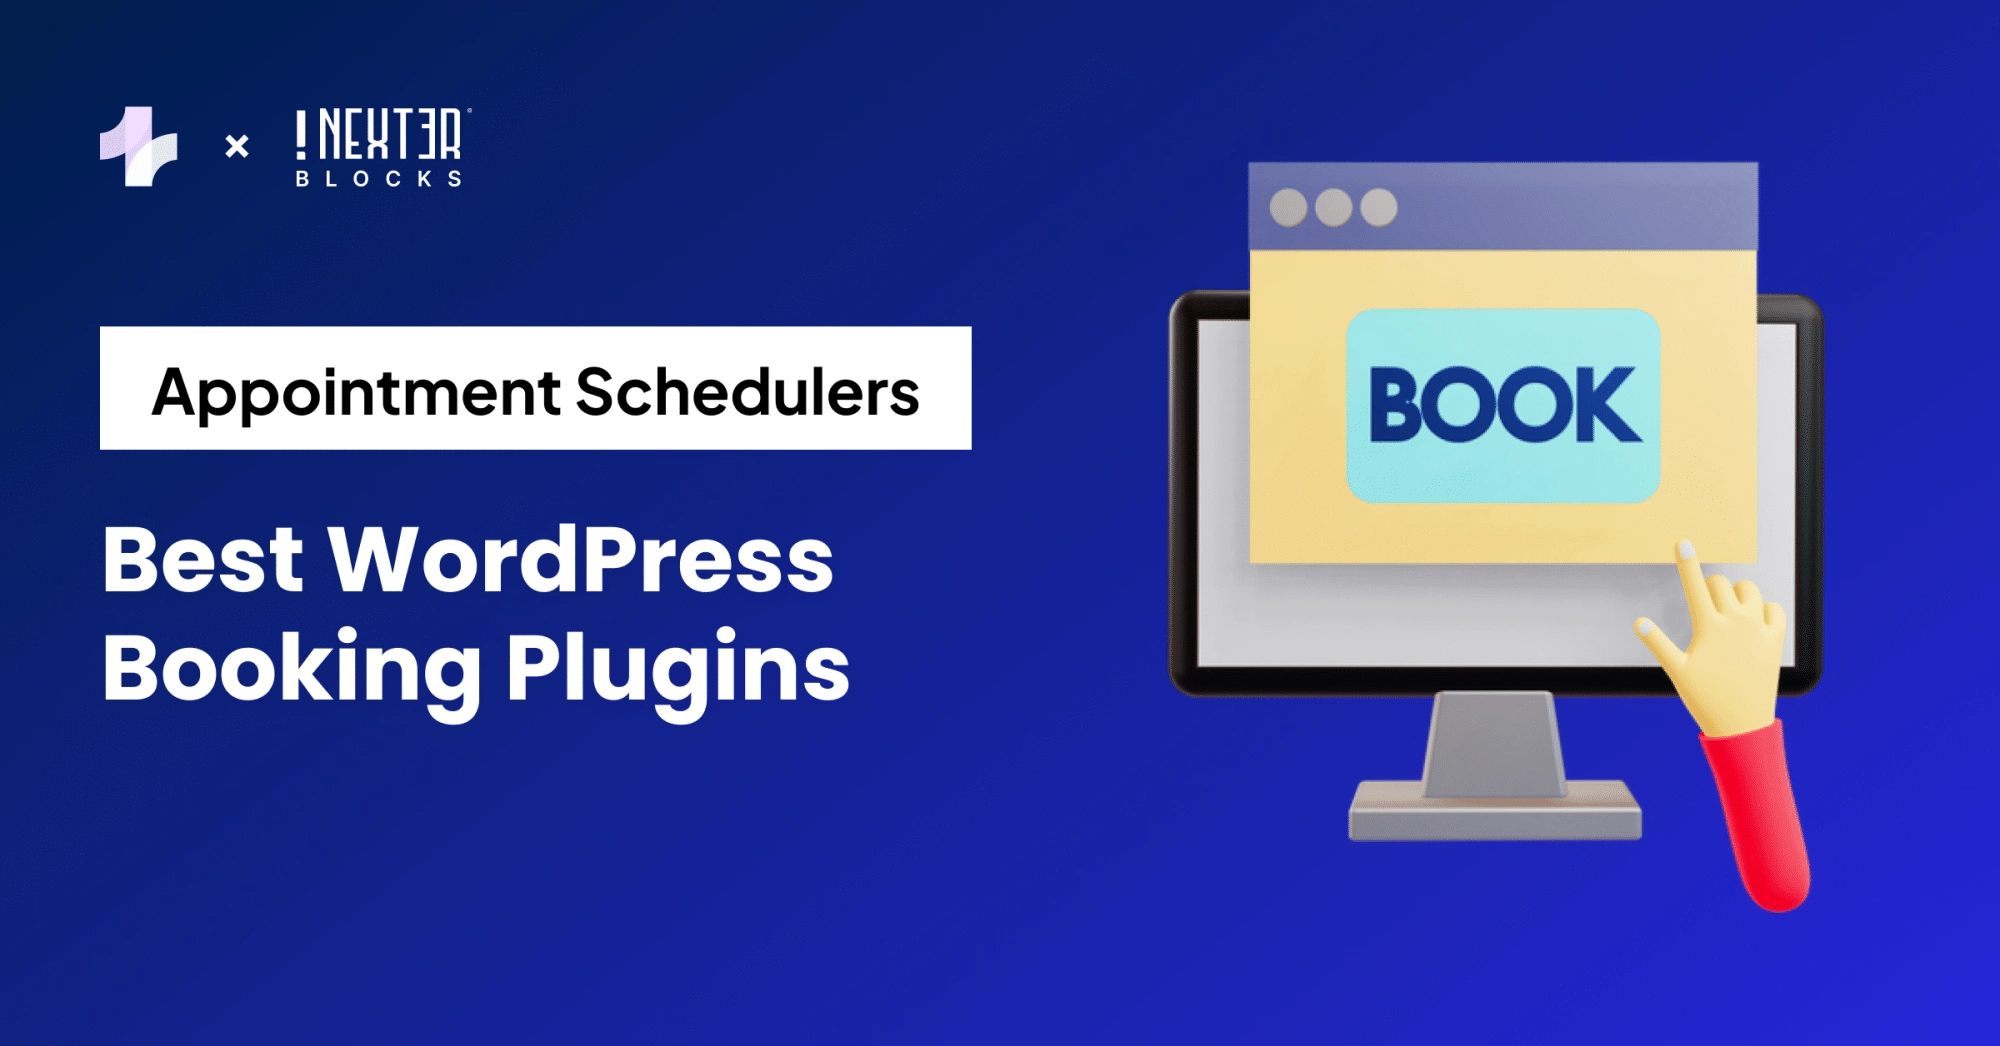 image 37 - 5 Best WordPress Booking Plugins [Appointment Schedulers]